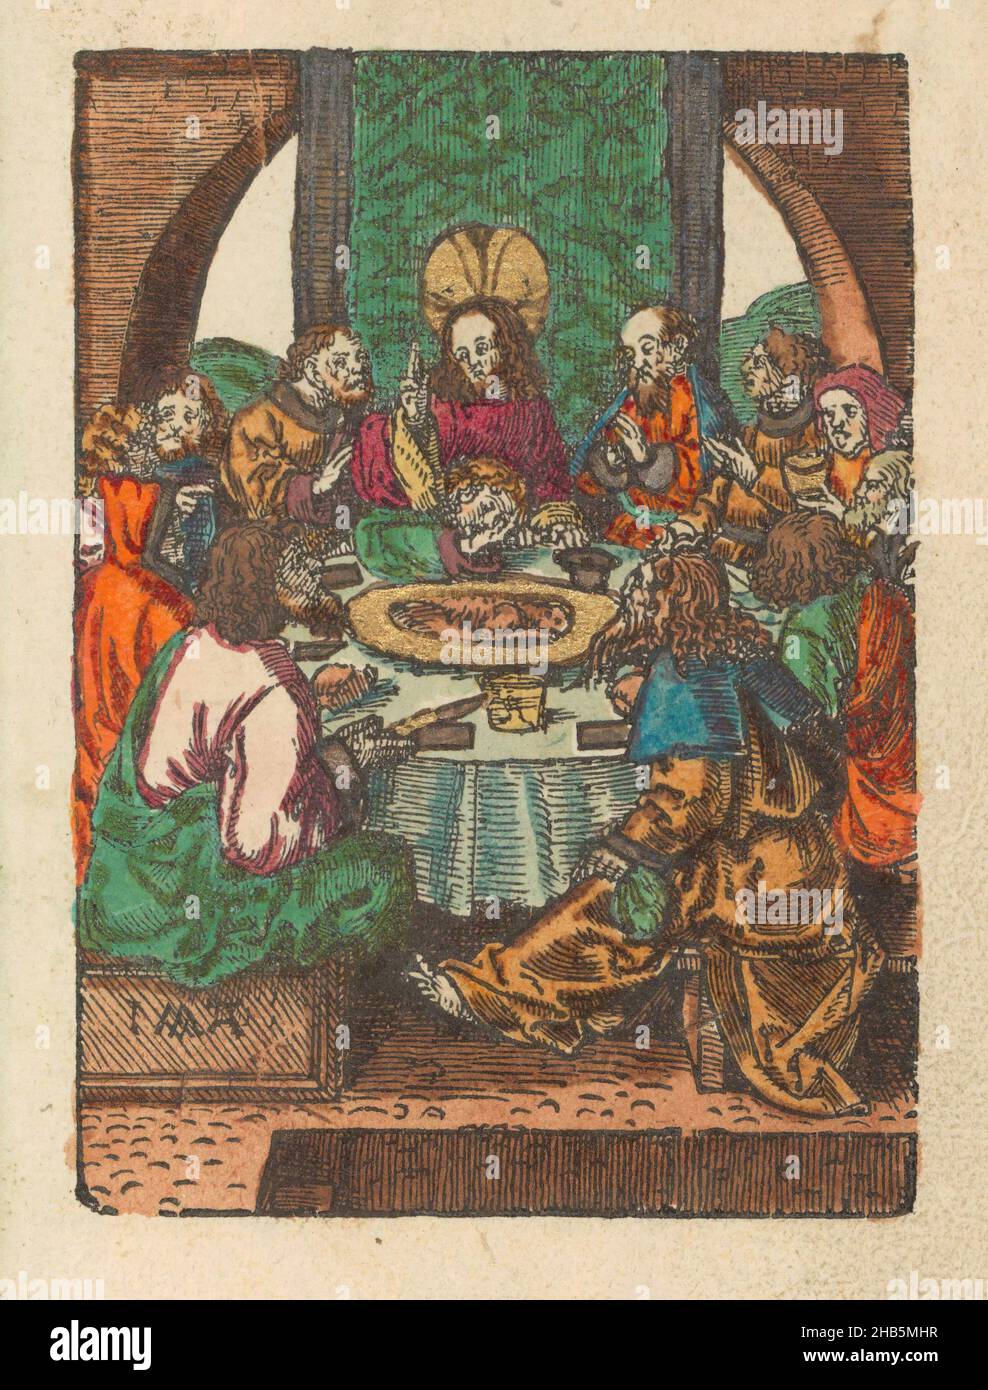 Last Supper, The Little Passion (series title), Stupid Passion (series title), Christ sits with his disciples at the Last Supper. John lays his head against Christ's chest. The paschal lamb lies on a platter on the table. In the foreground Judas with the bag of silver pieces in his hand. Print is part of a book., print maker: Jacob Cornelisz van Oostsanen (mentioned on object), publisher: Doen Pietersz., Amsterdam,  1520 - 1521 and/or c. 1530, paper, height 111 mm × width 80 mmheight 159 mm × width 102 mm Stock Photo